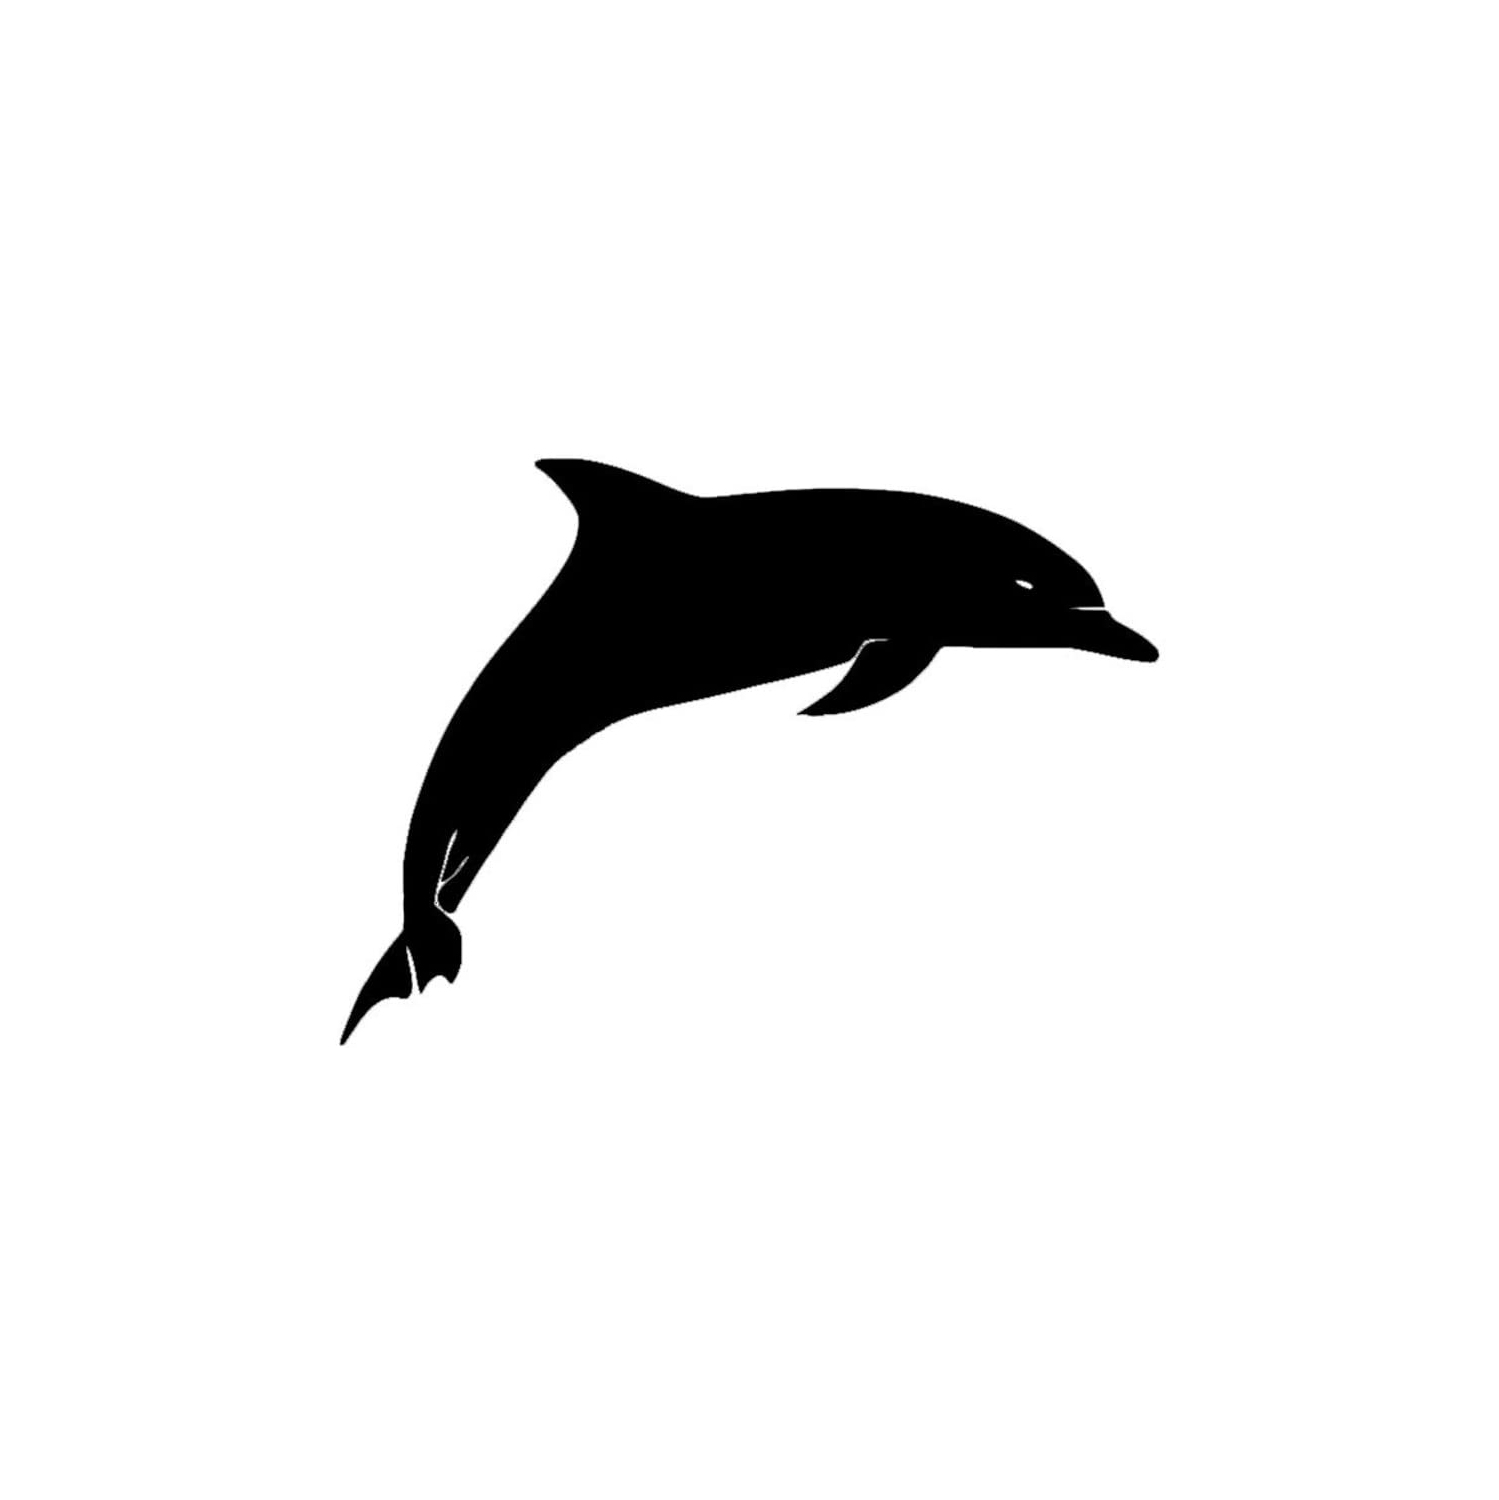 Cute Dolphin Vinyl Decal Sticker | Cars Trucks Vans Walls Laptops Cups | Black | 5.5 inches | KCD1513